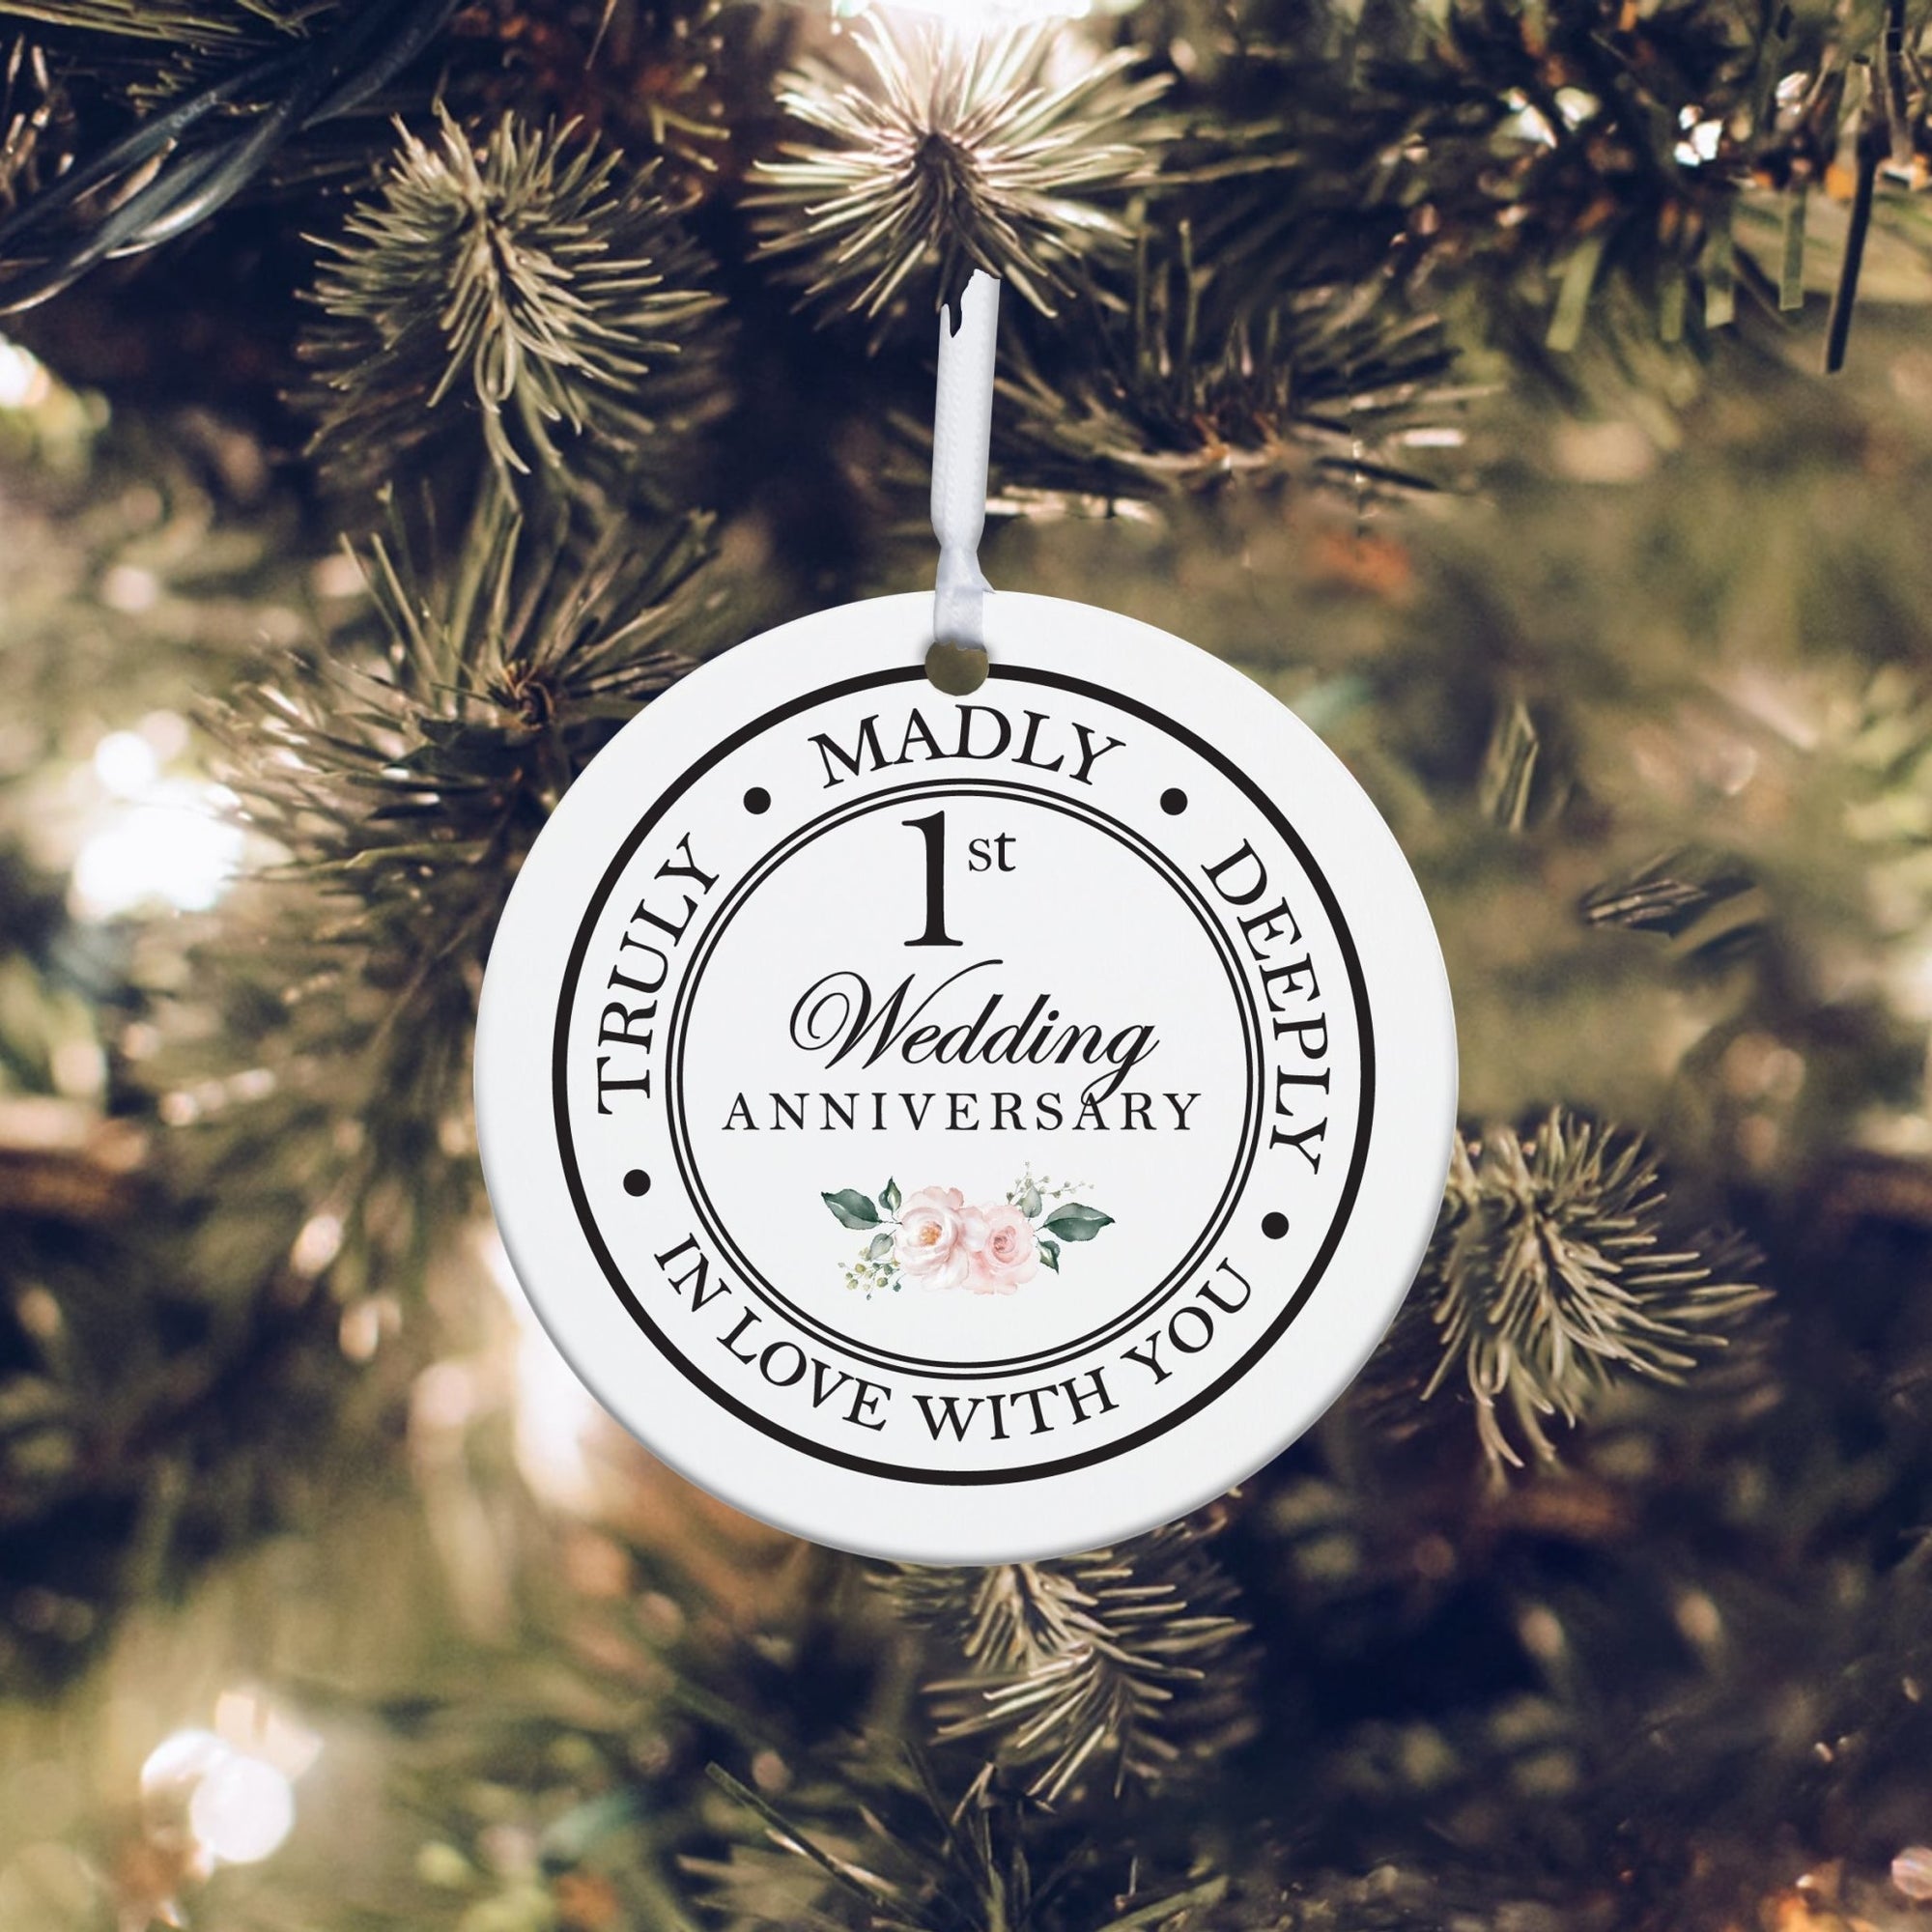 1st Wedding Anniversary White Ornament With Inspirational Message Gift Ideas - Truly, Madly, Deeply In Love With You - LifeSong Milestones